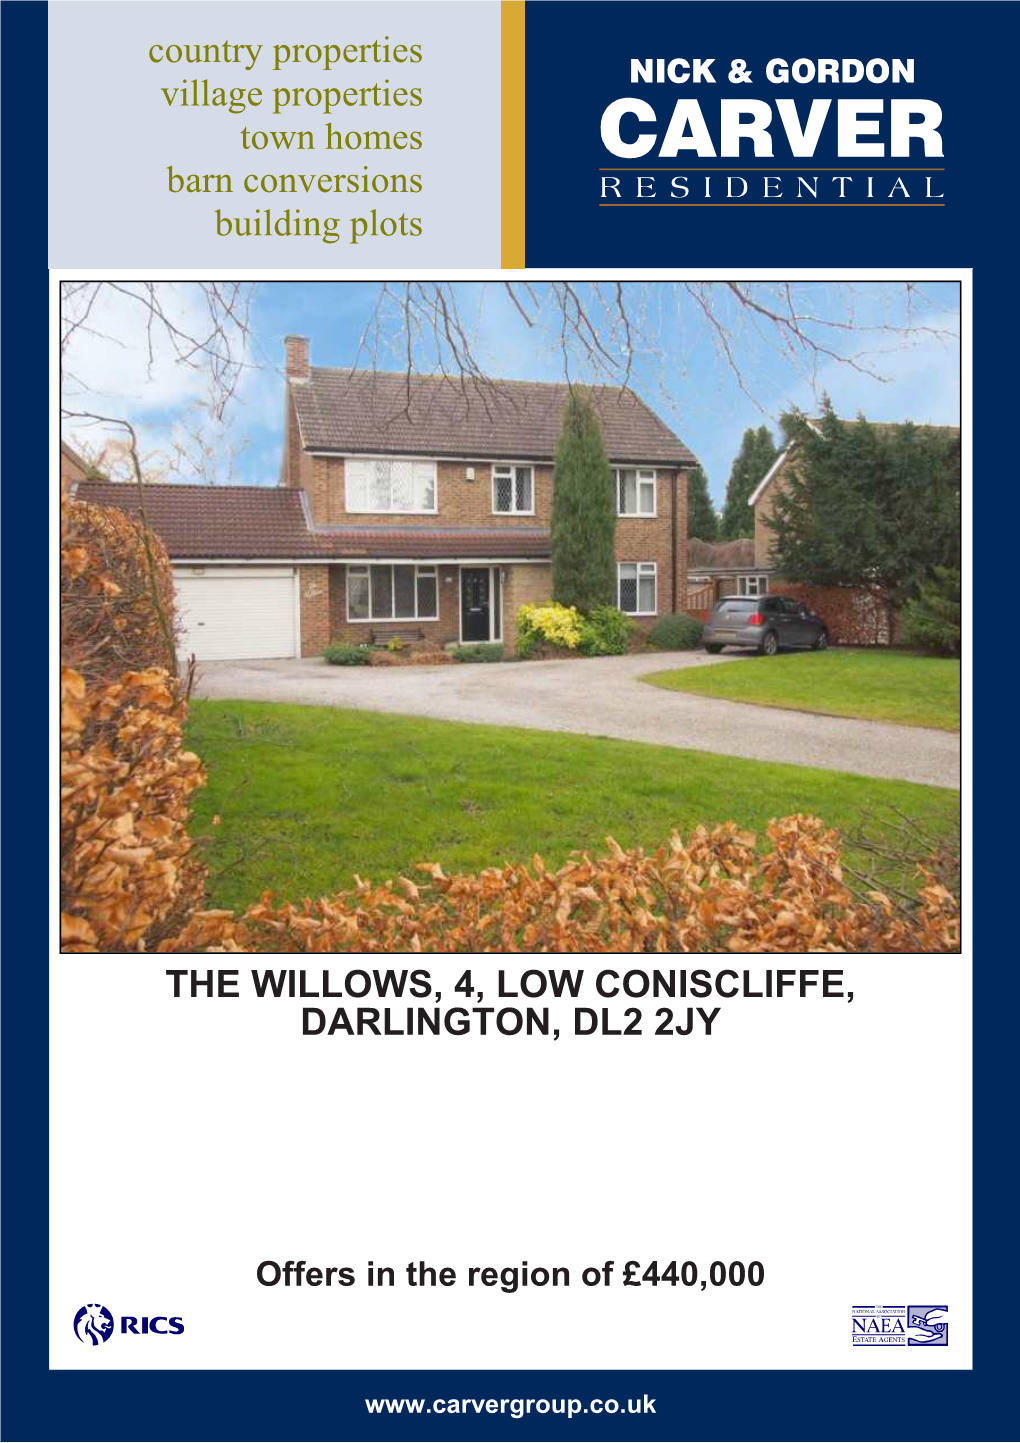 The Willows, 4, Low Coniscliffe, Darlington, Dl2 2Jy